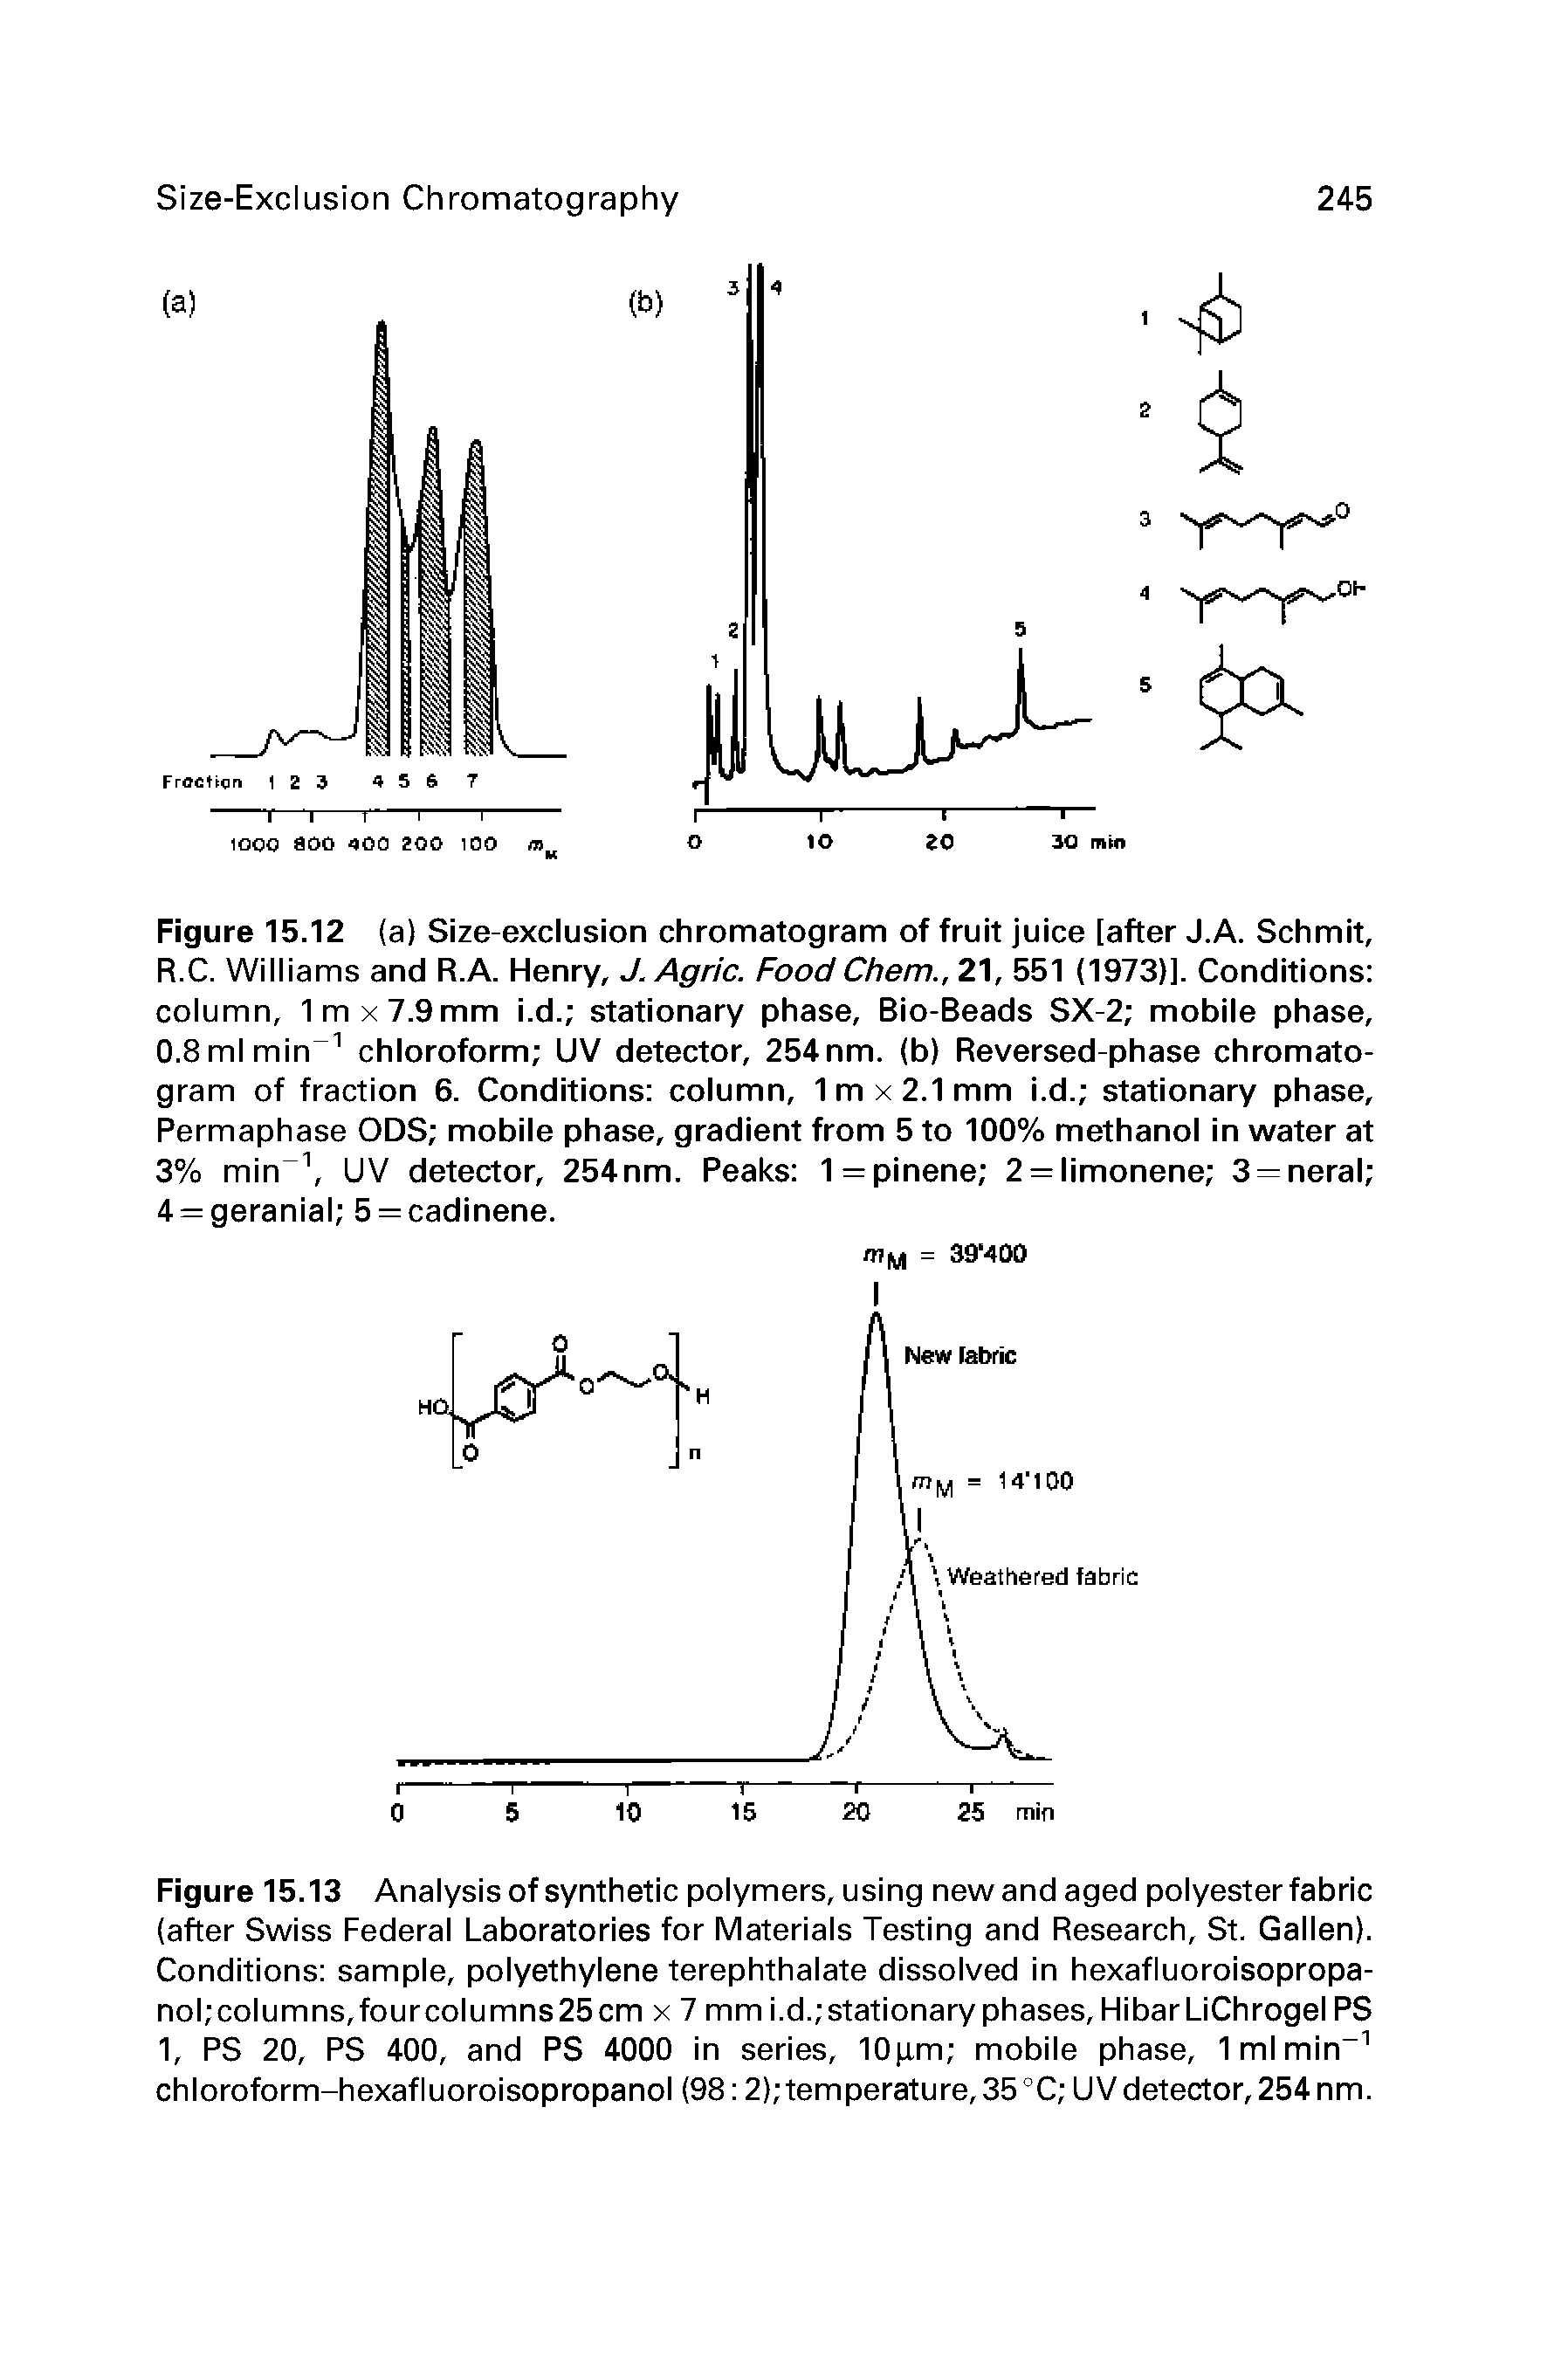 Figure 15.13 Analysis of synthetic polymers, using new and aged polyester fabric (after Swiss Federal Laboratories for Materials Testing and Research, St. Galien). Conditions sample, polyethylene terephthalate dissolved in hexafluoroisopropa-nol columns,fourcolumns25cm x 7 mm i.d. stationary phases, HibarLiChrogel PS 1, PS 20, PS 400, and PS 4000 in series, 10[im mobile phase, Imlrnin" chloroform-hexafluoroisopropanol (98 2) temperature, 35 °C UV detector, 254 nm.